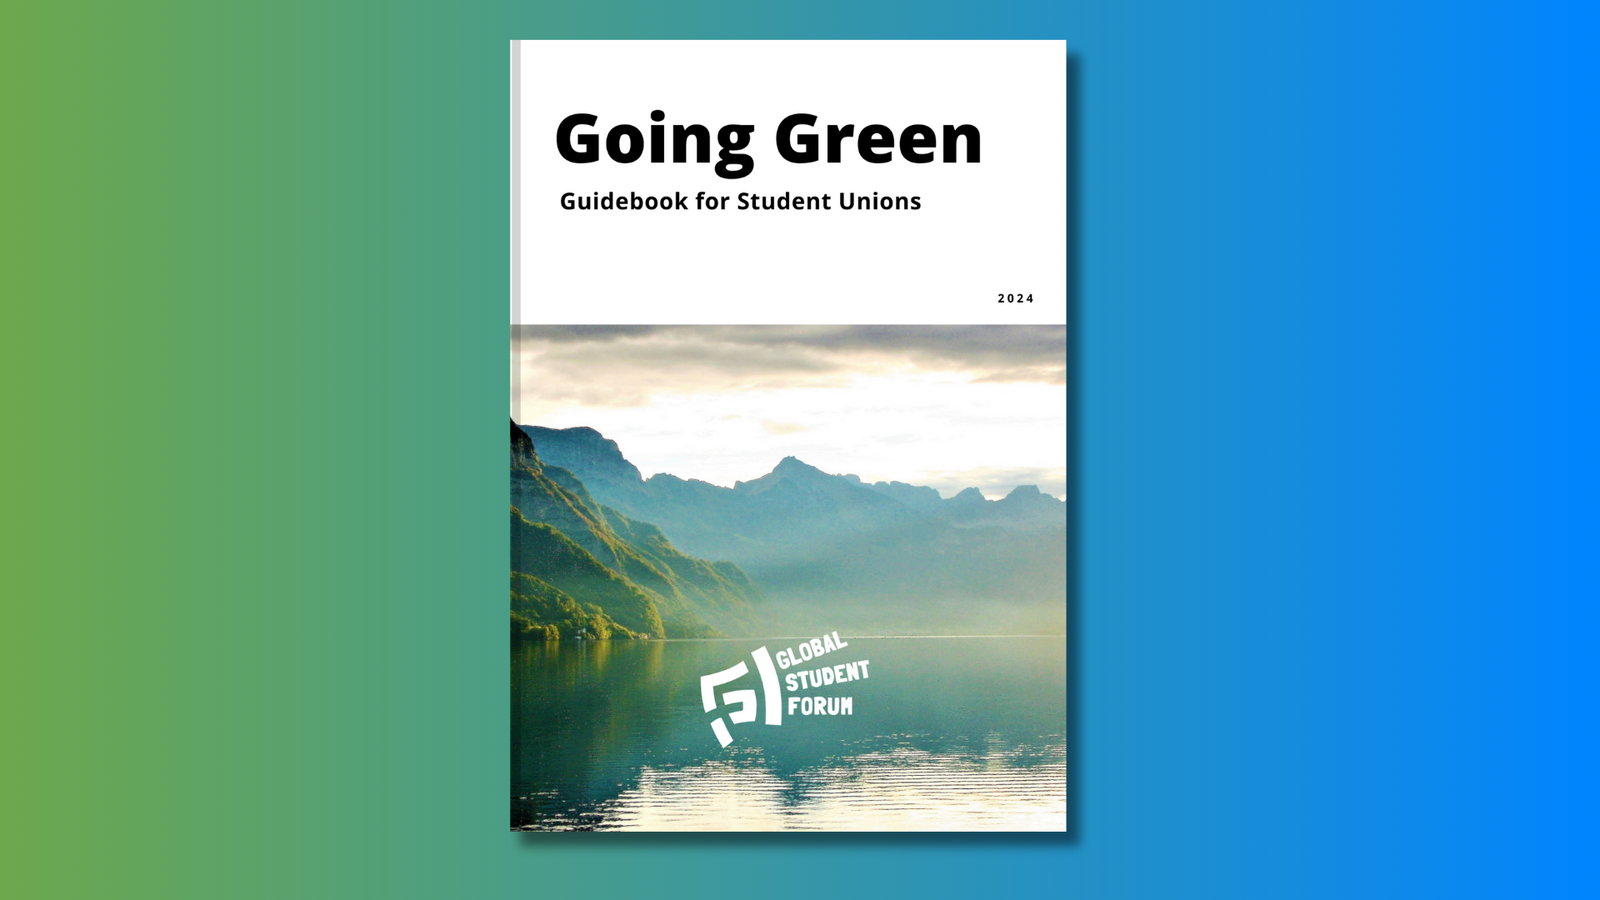 Going Green: A Guidebook for Student Unions